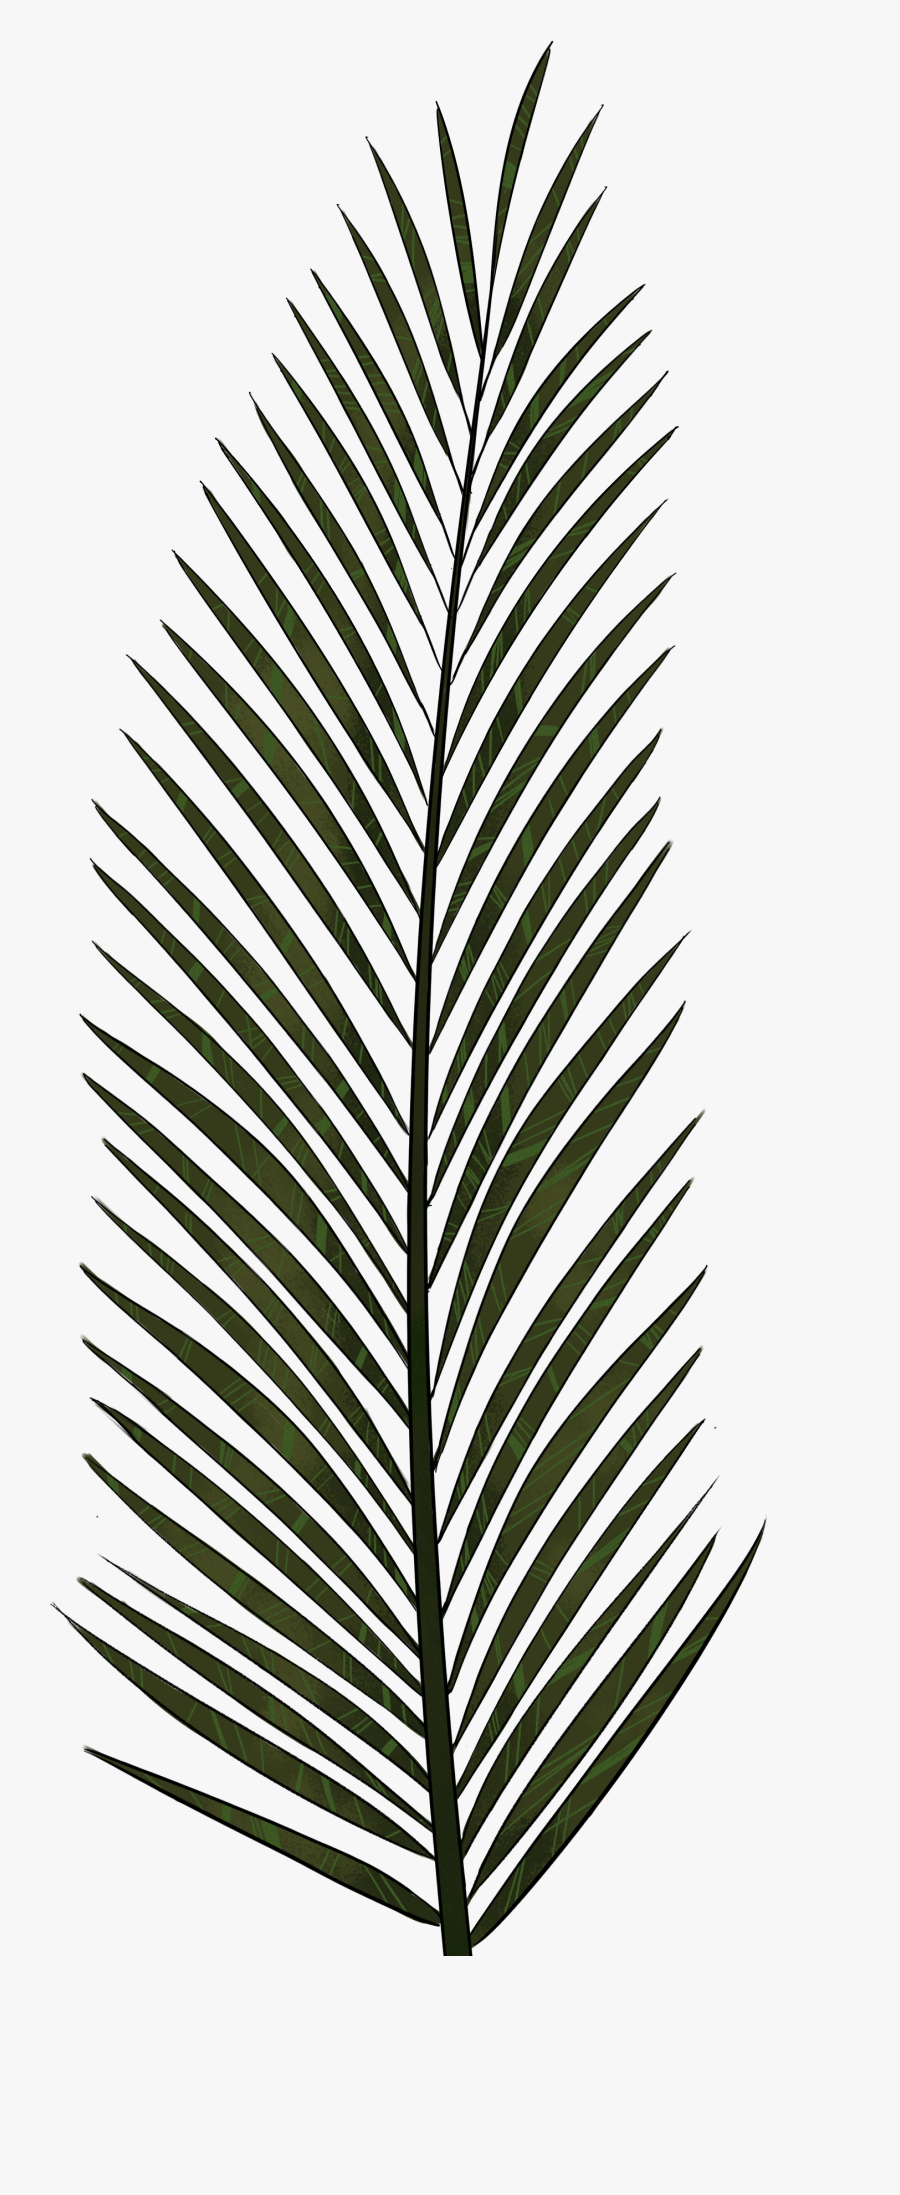 Palm Leaf Png Textures And Style Radin Mas - Palm Tree Leaf Texture, Transparent Clipart